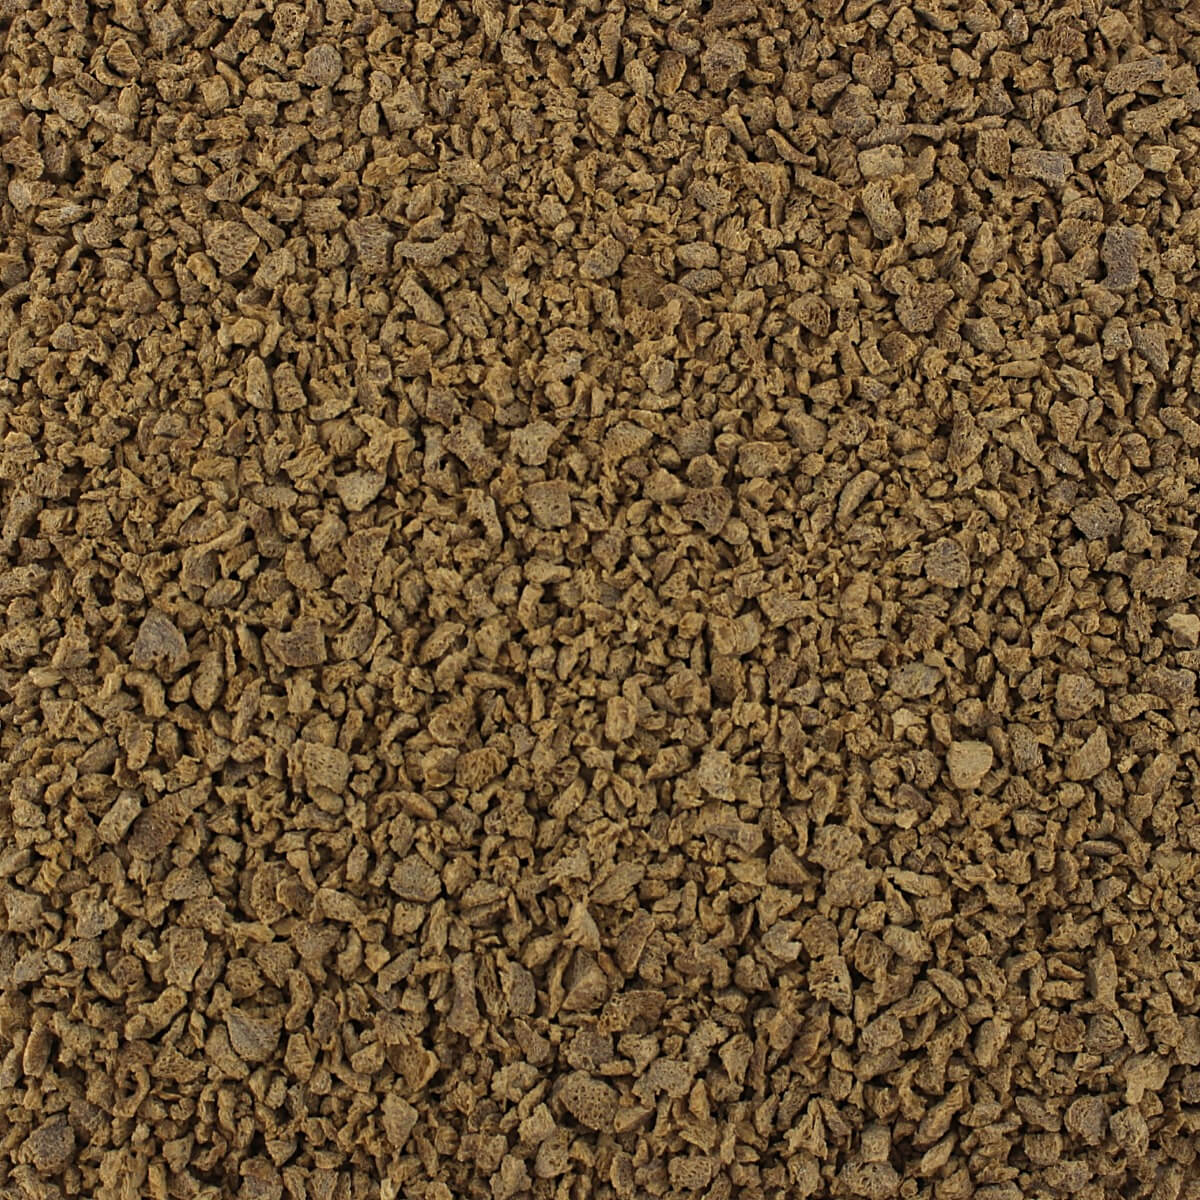 A close up image of brown gravel.